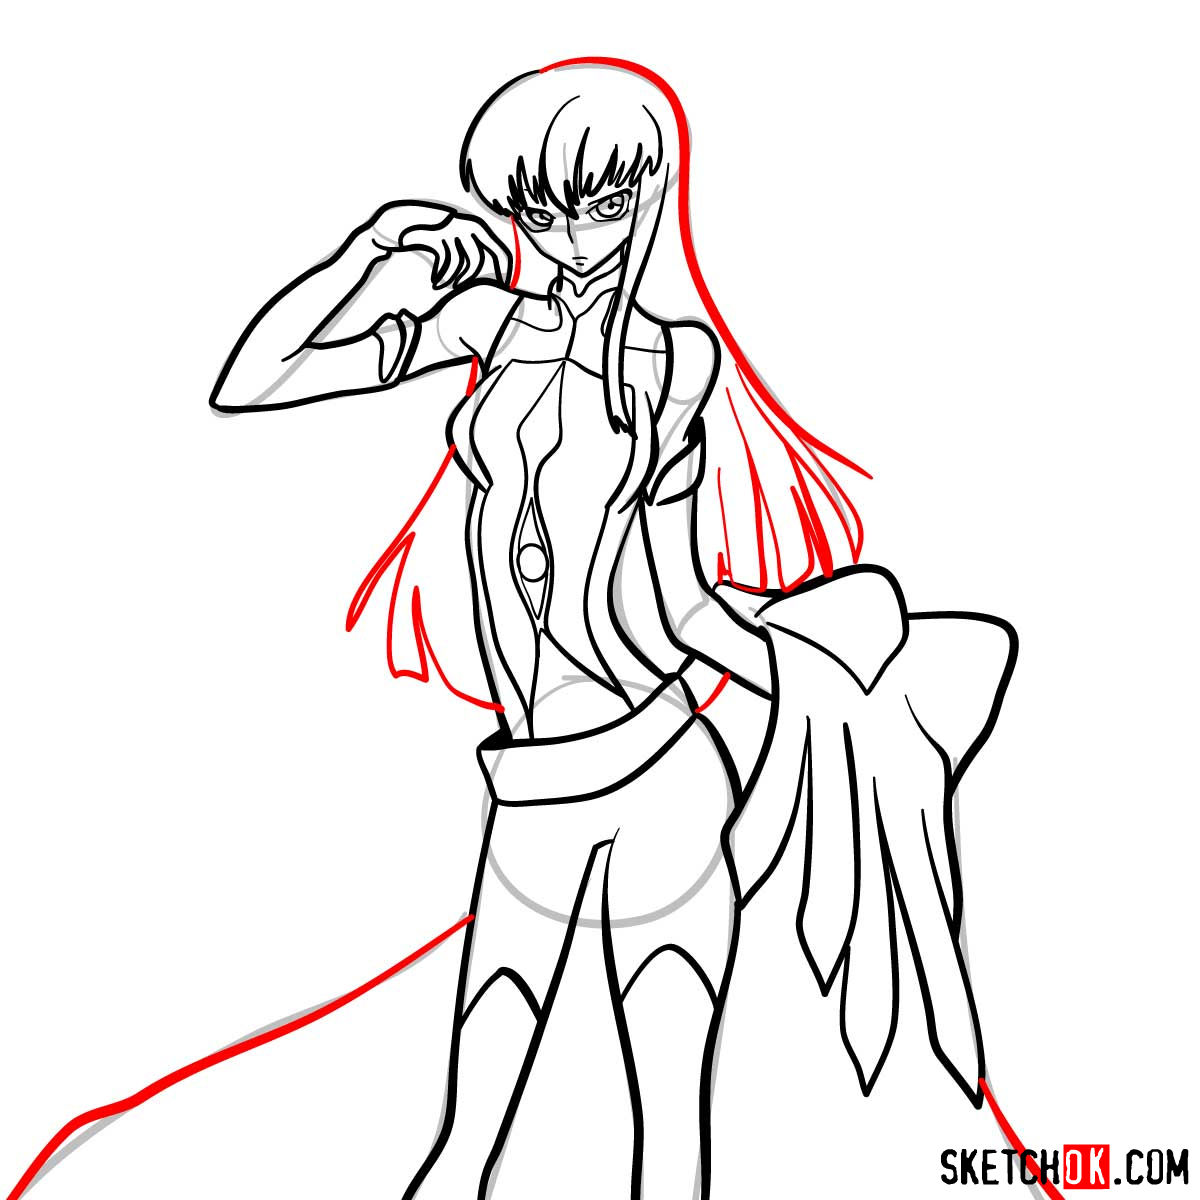 16 steps drawing guide of C.C. from Code Geass anime - step 14